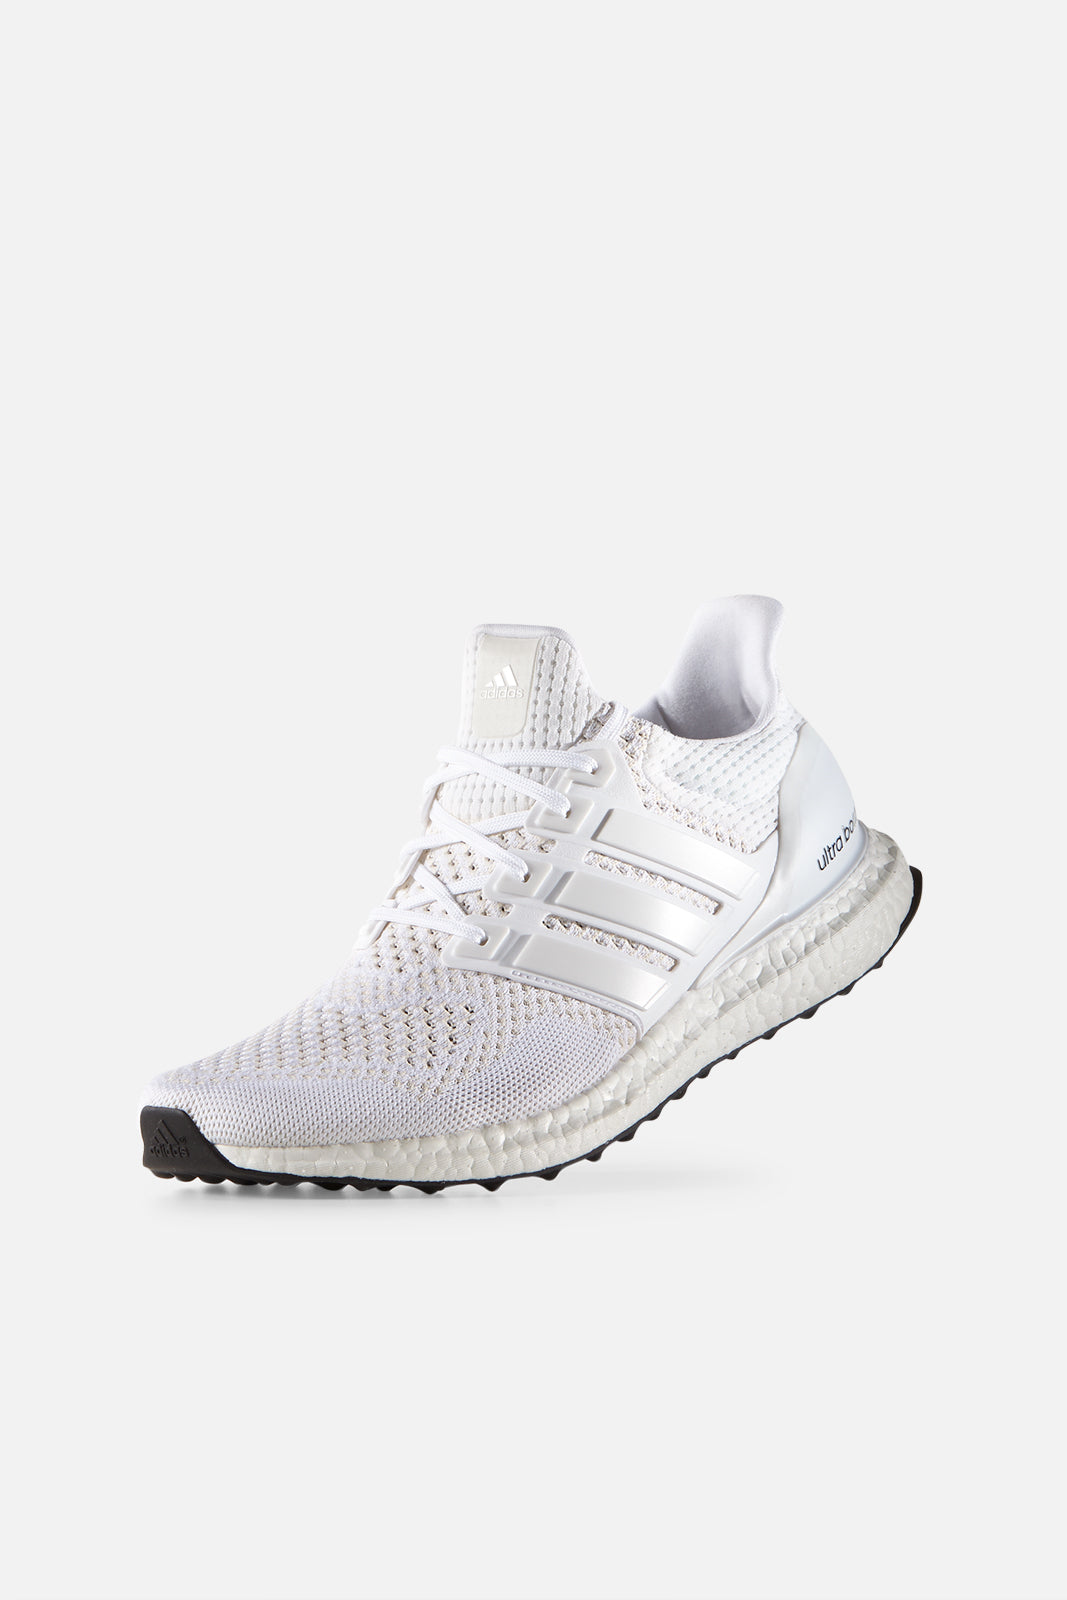 is adidas shopify